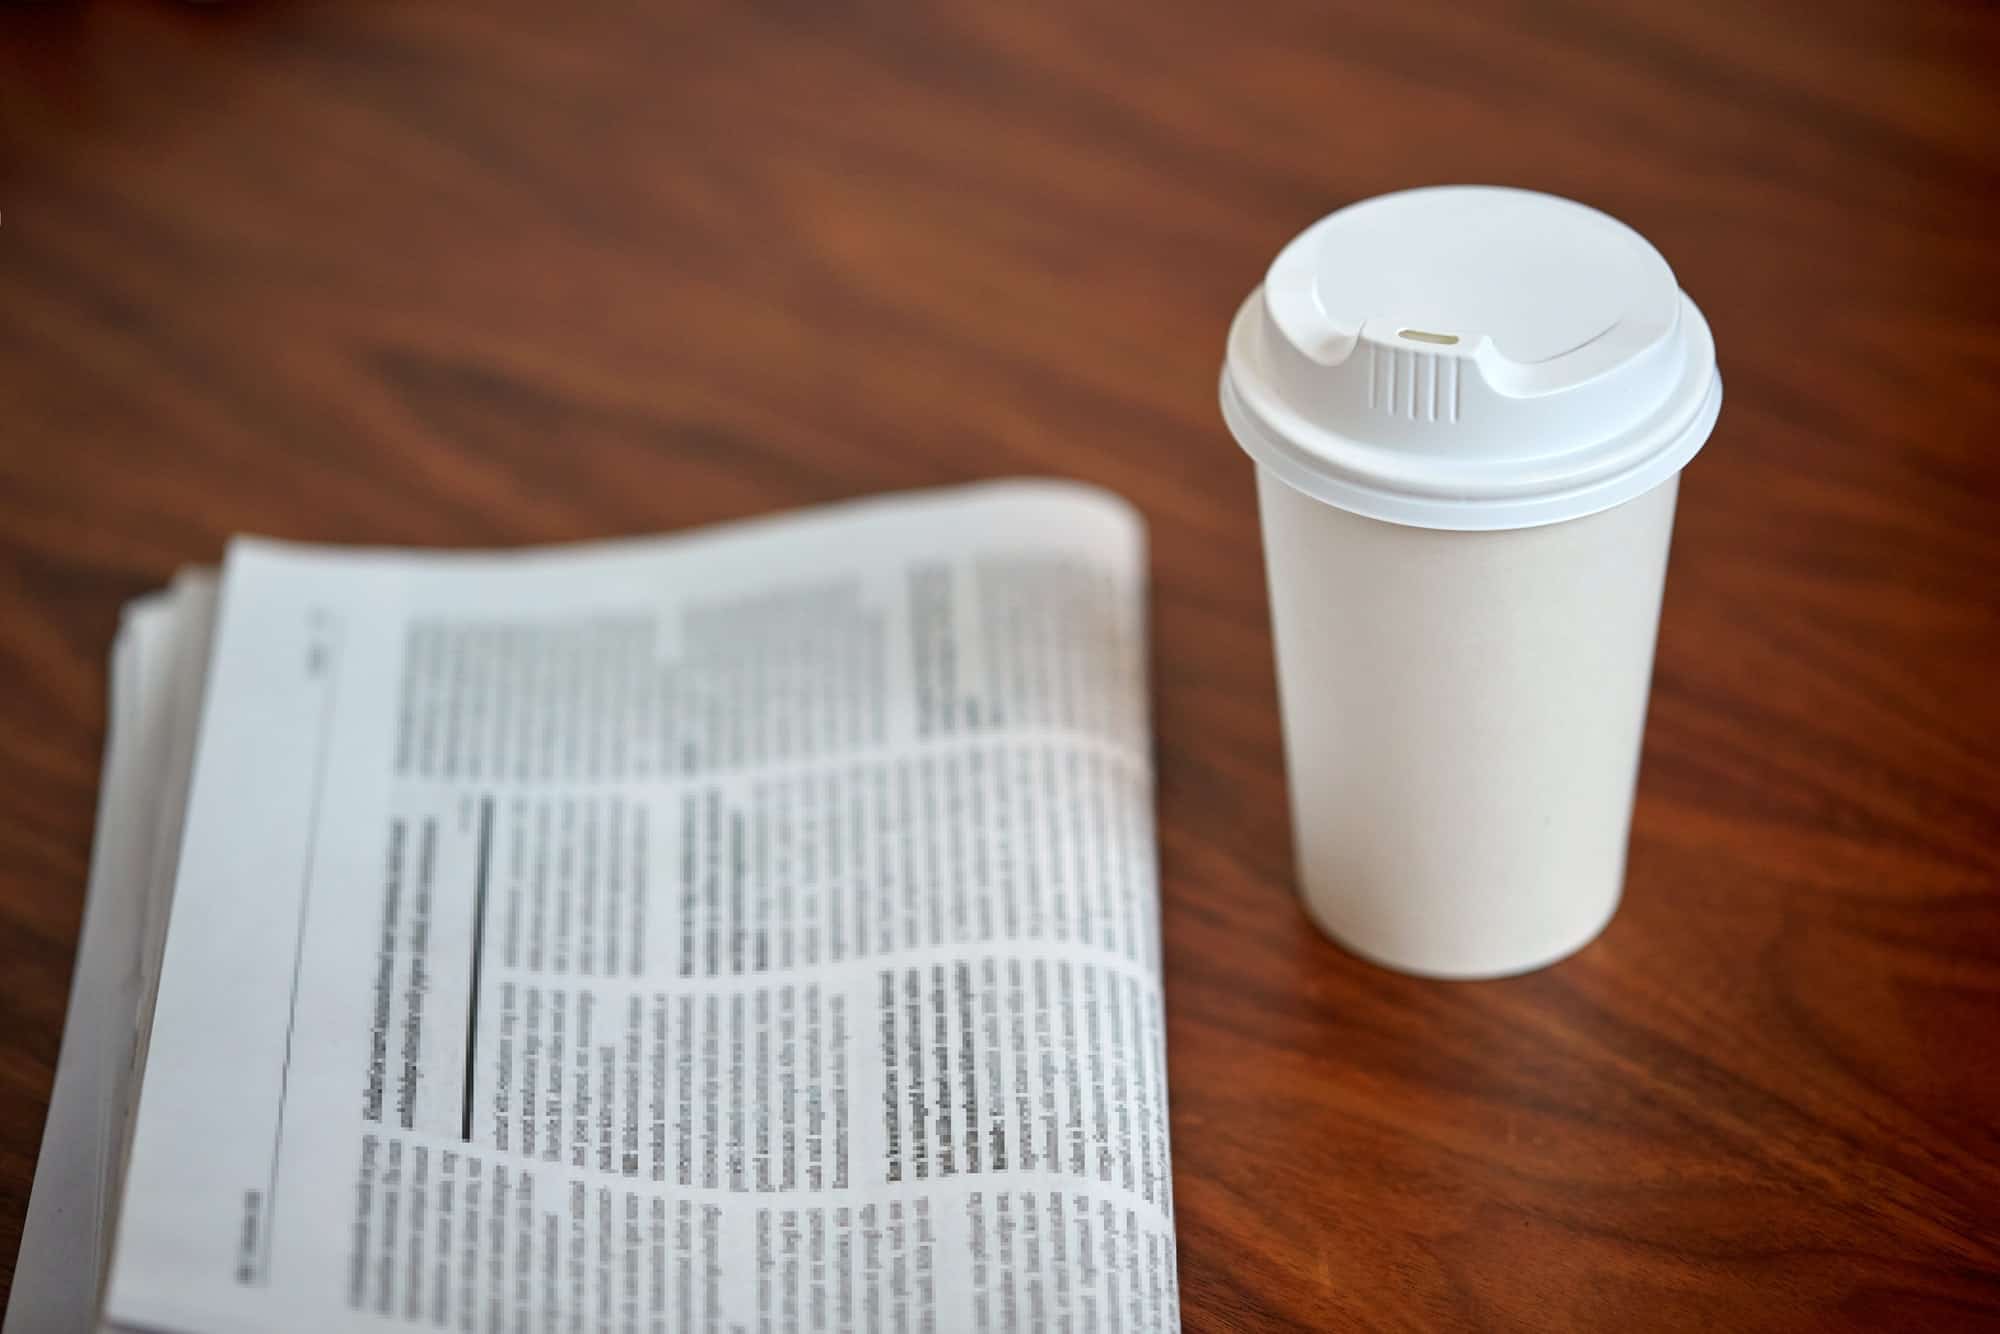 coffee drink in paper cup and newspaper on table